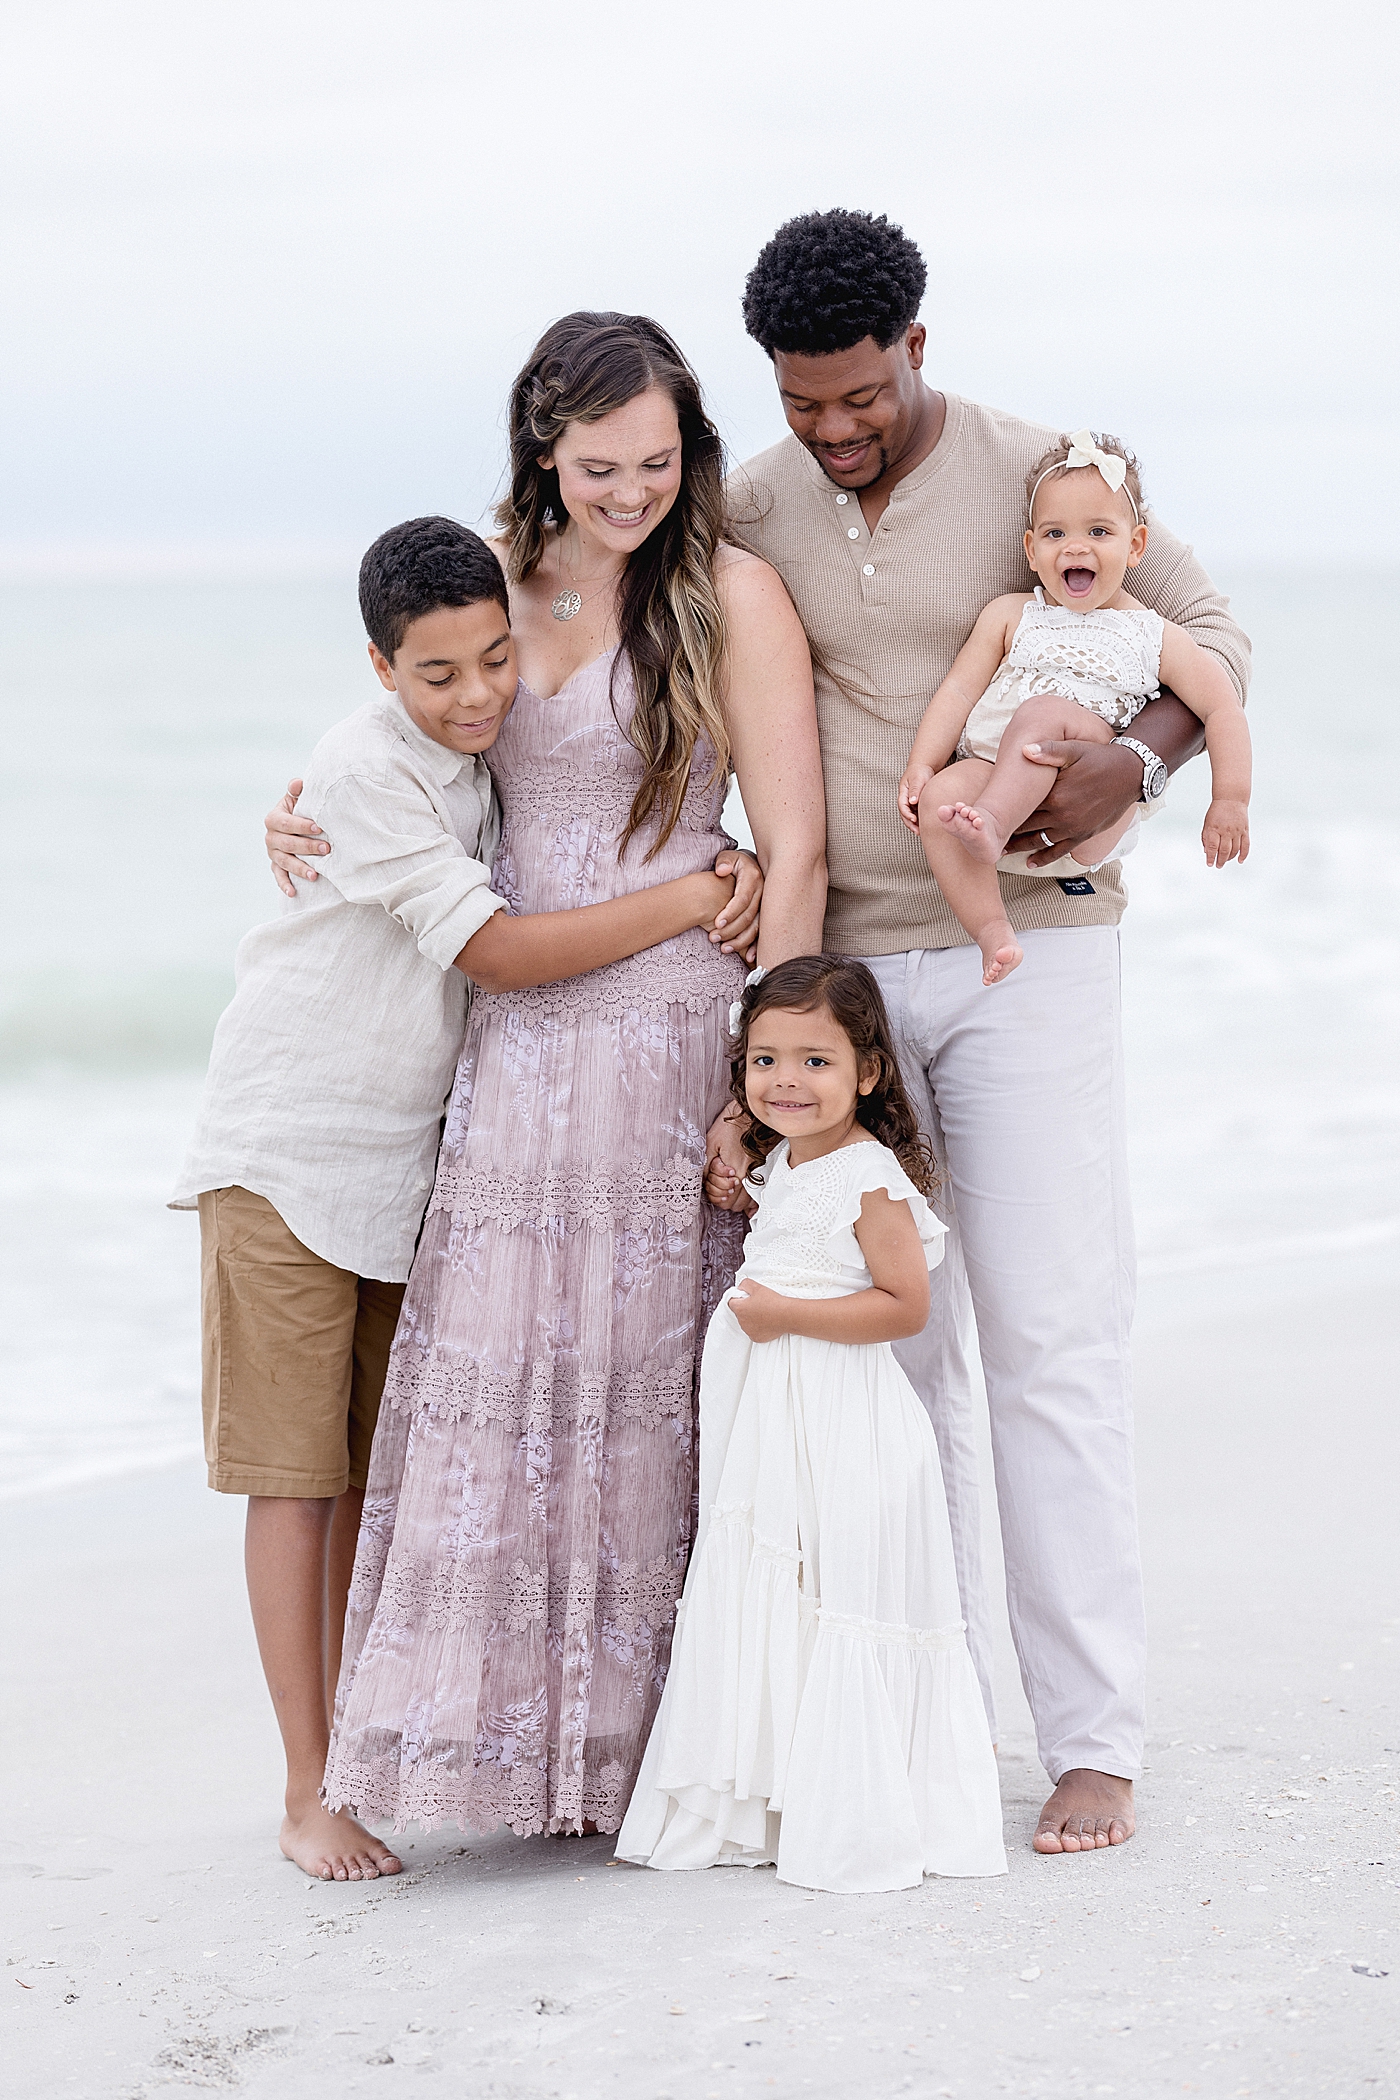 Family portraits on the beach in Tampa, FL. Photo by Brittany Elise Photography.